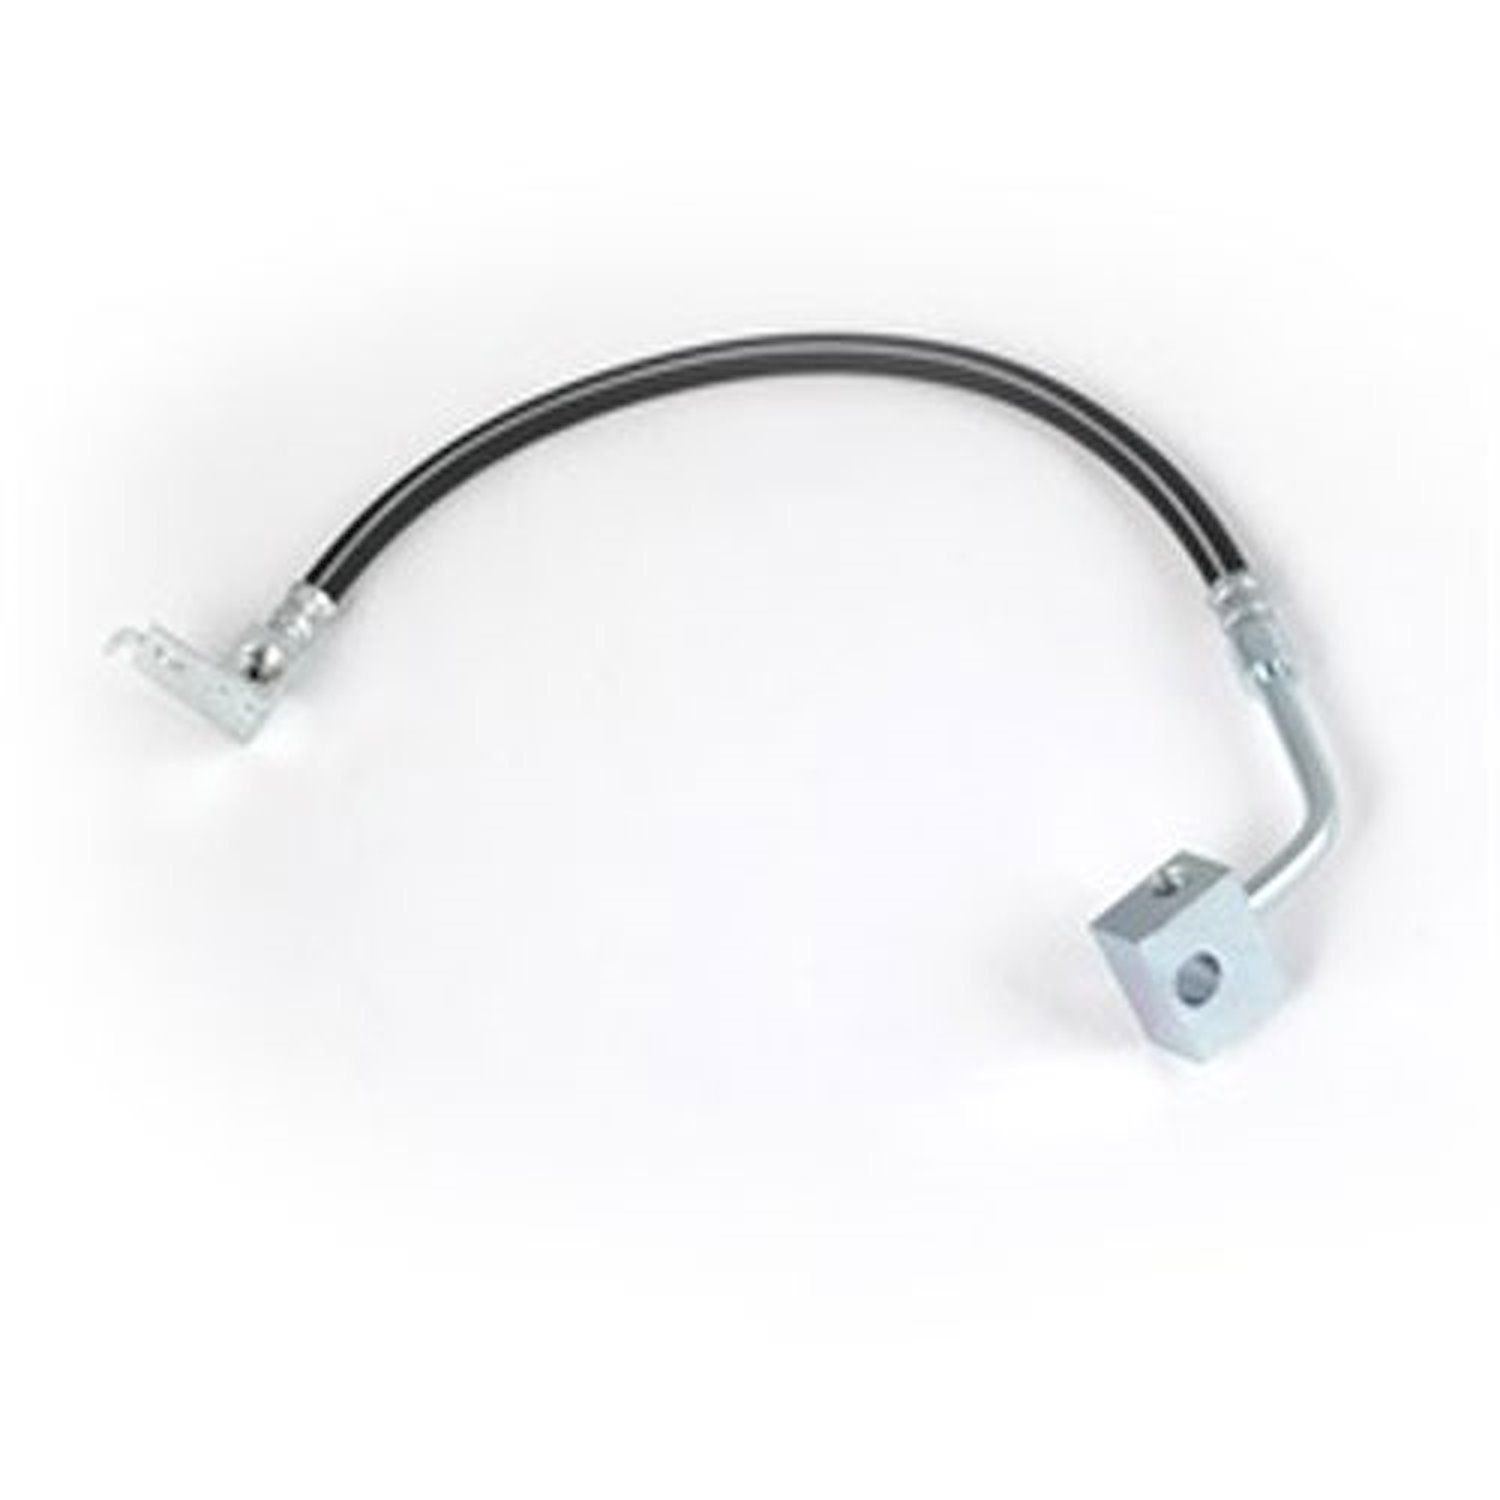 This center rear brake hose from Omix-ADA fits 02-05 Jeep Libertys. Include the union and tee.